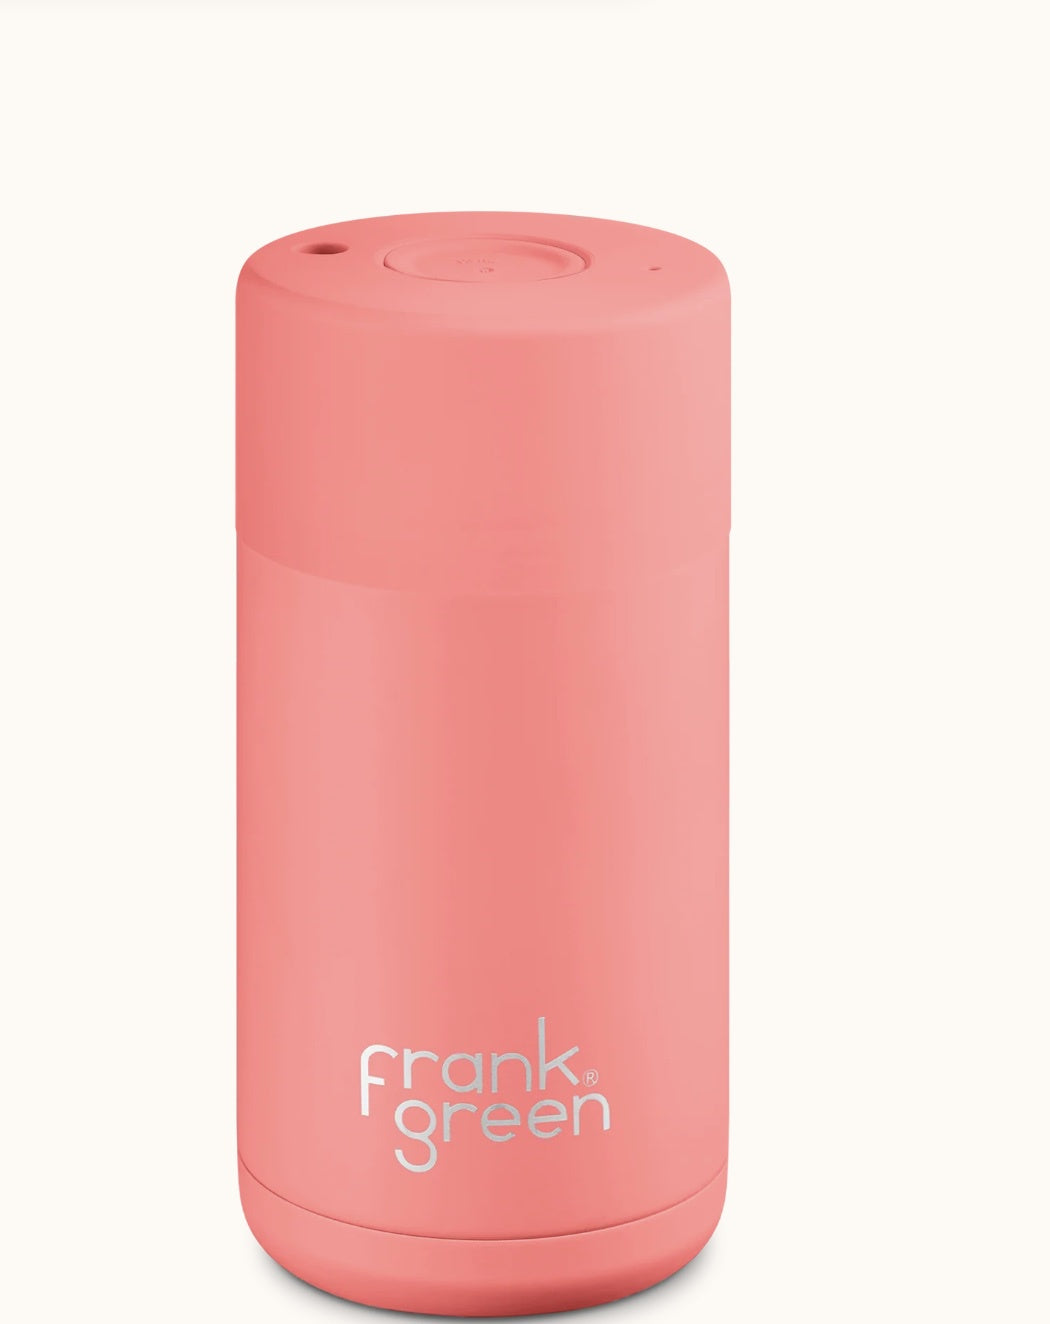 Limited Edition 12oz Stainless Steel Ceramic Reusable Cup - SWEET PEACH Drink Bottles Frank Green   